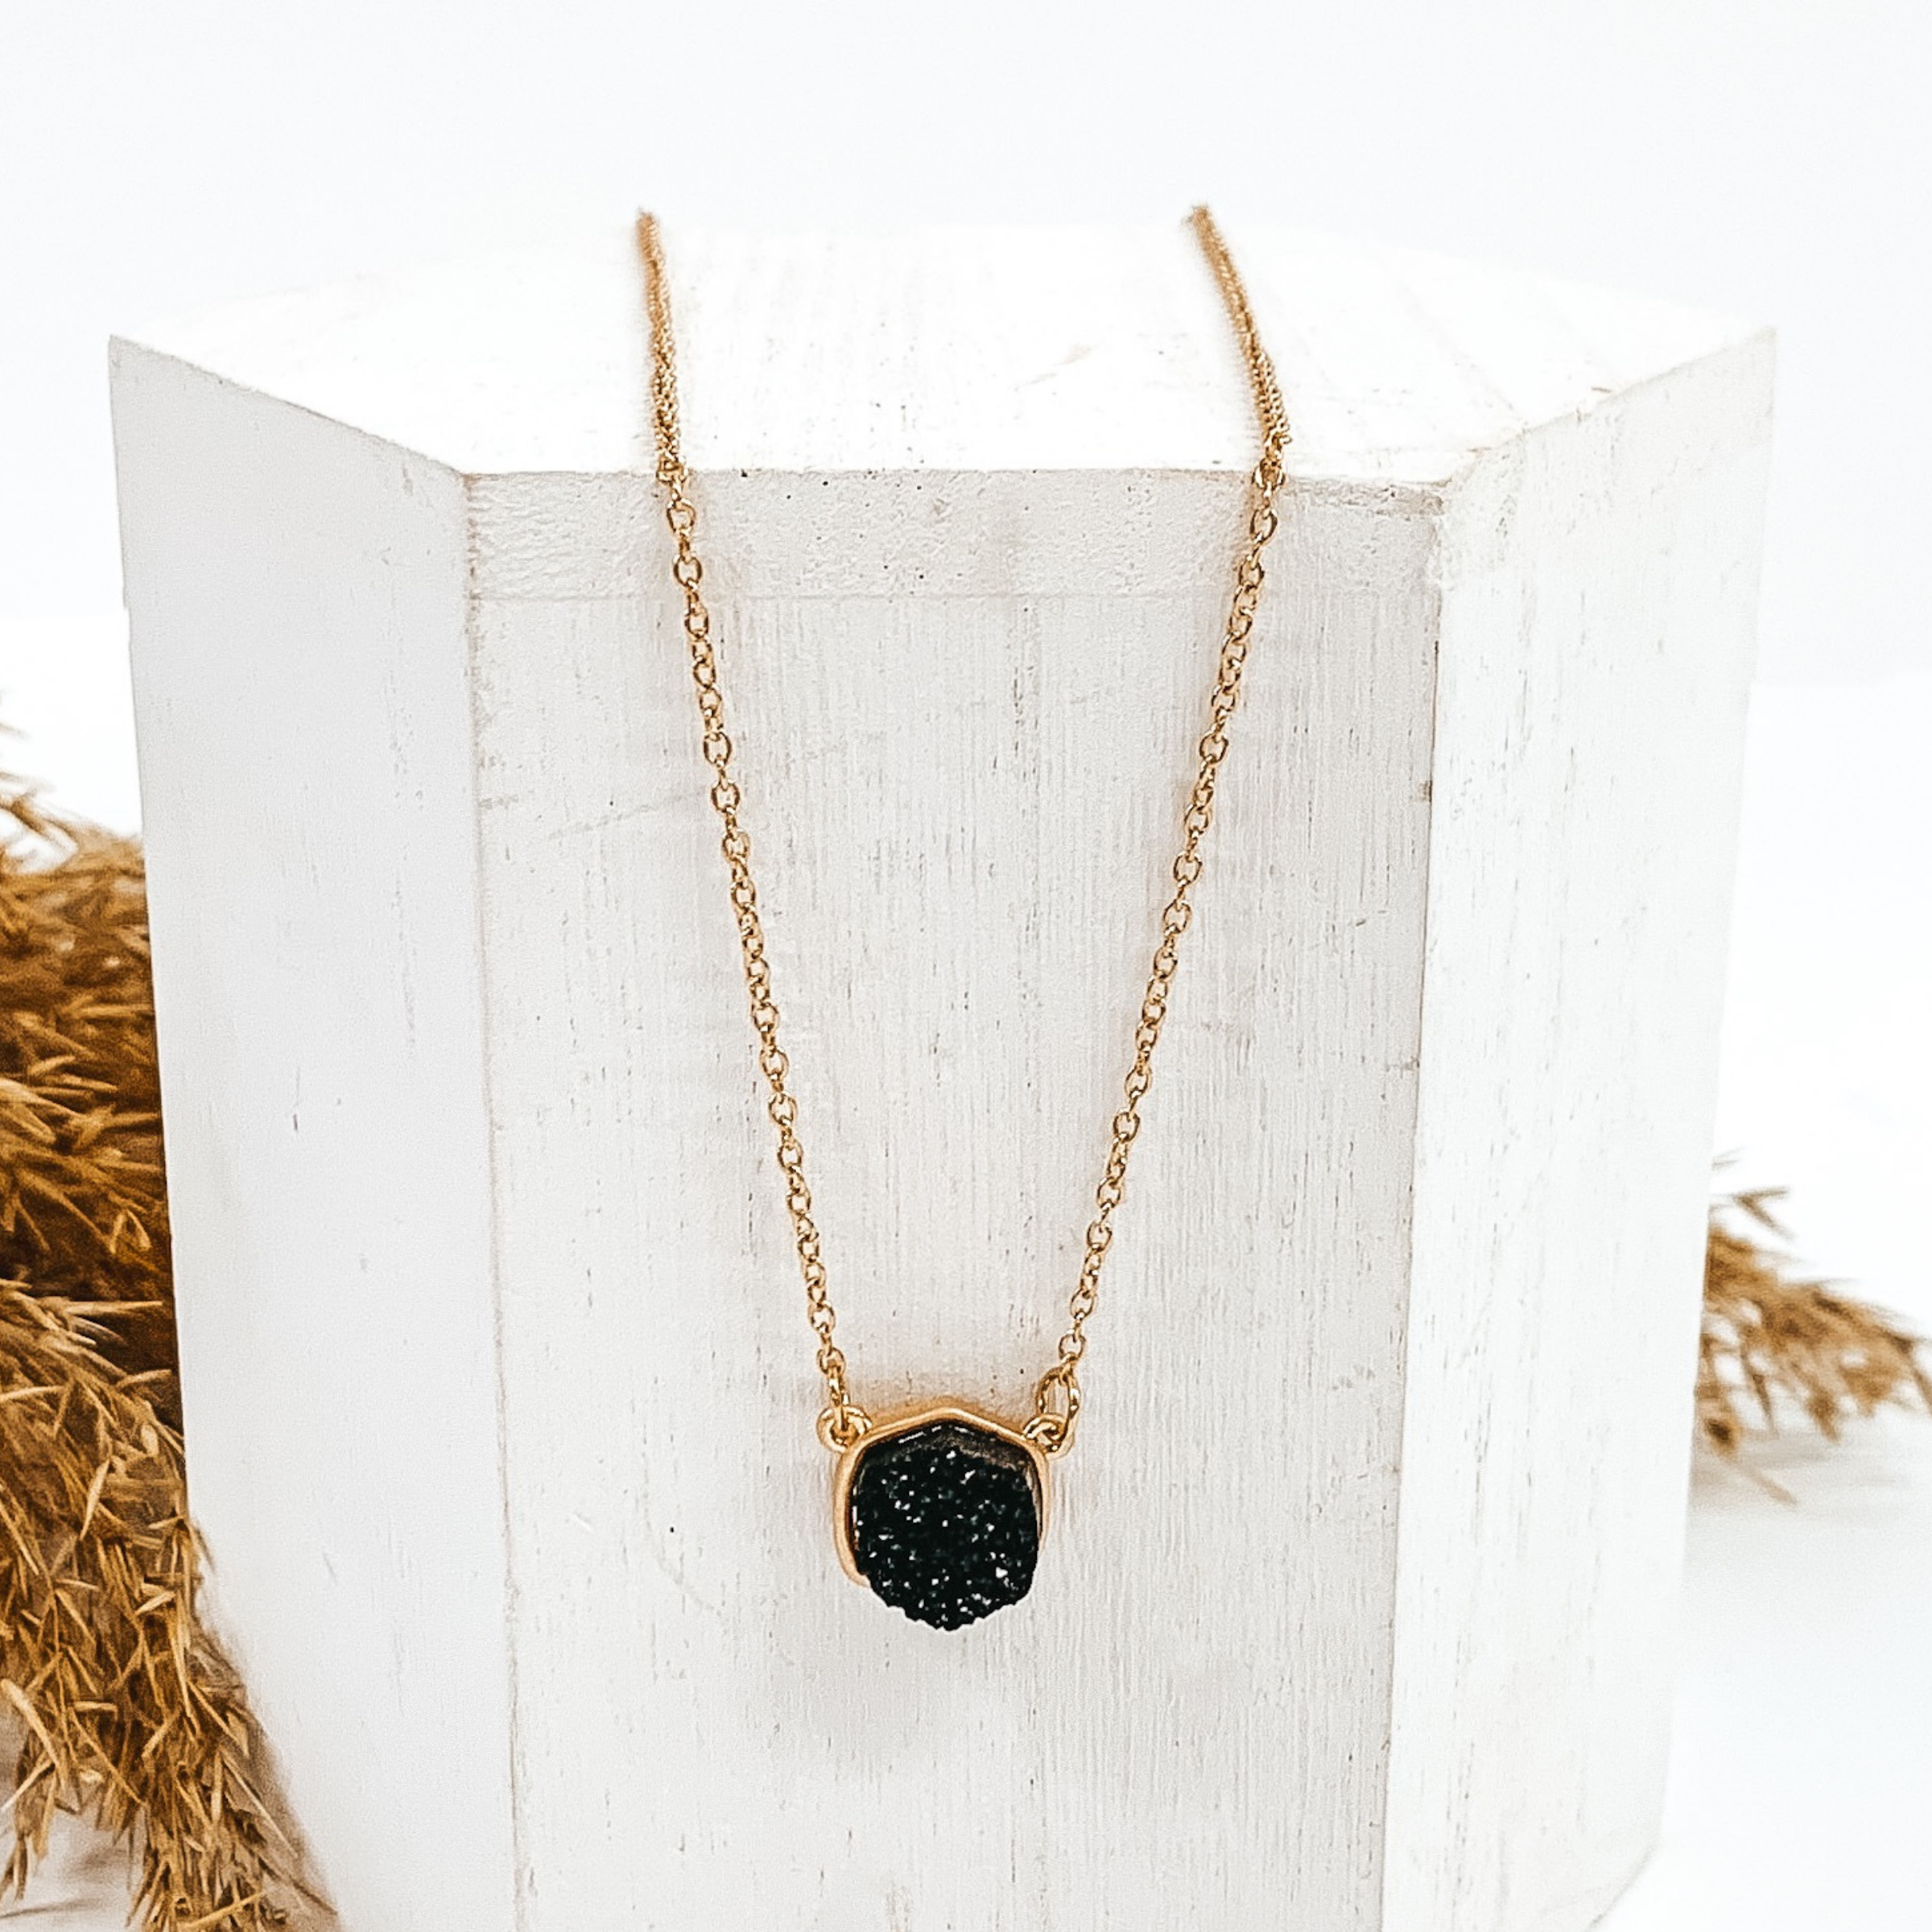 Druzy Hexagon Gold Necklace in Black - Giddy Up Glamour Boutique